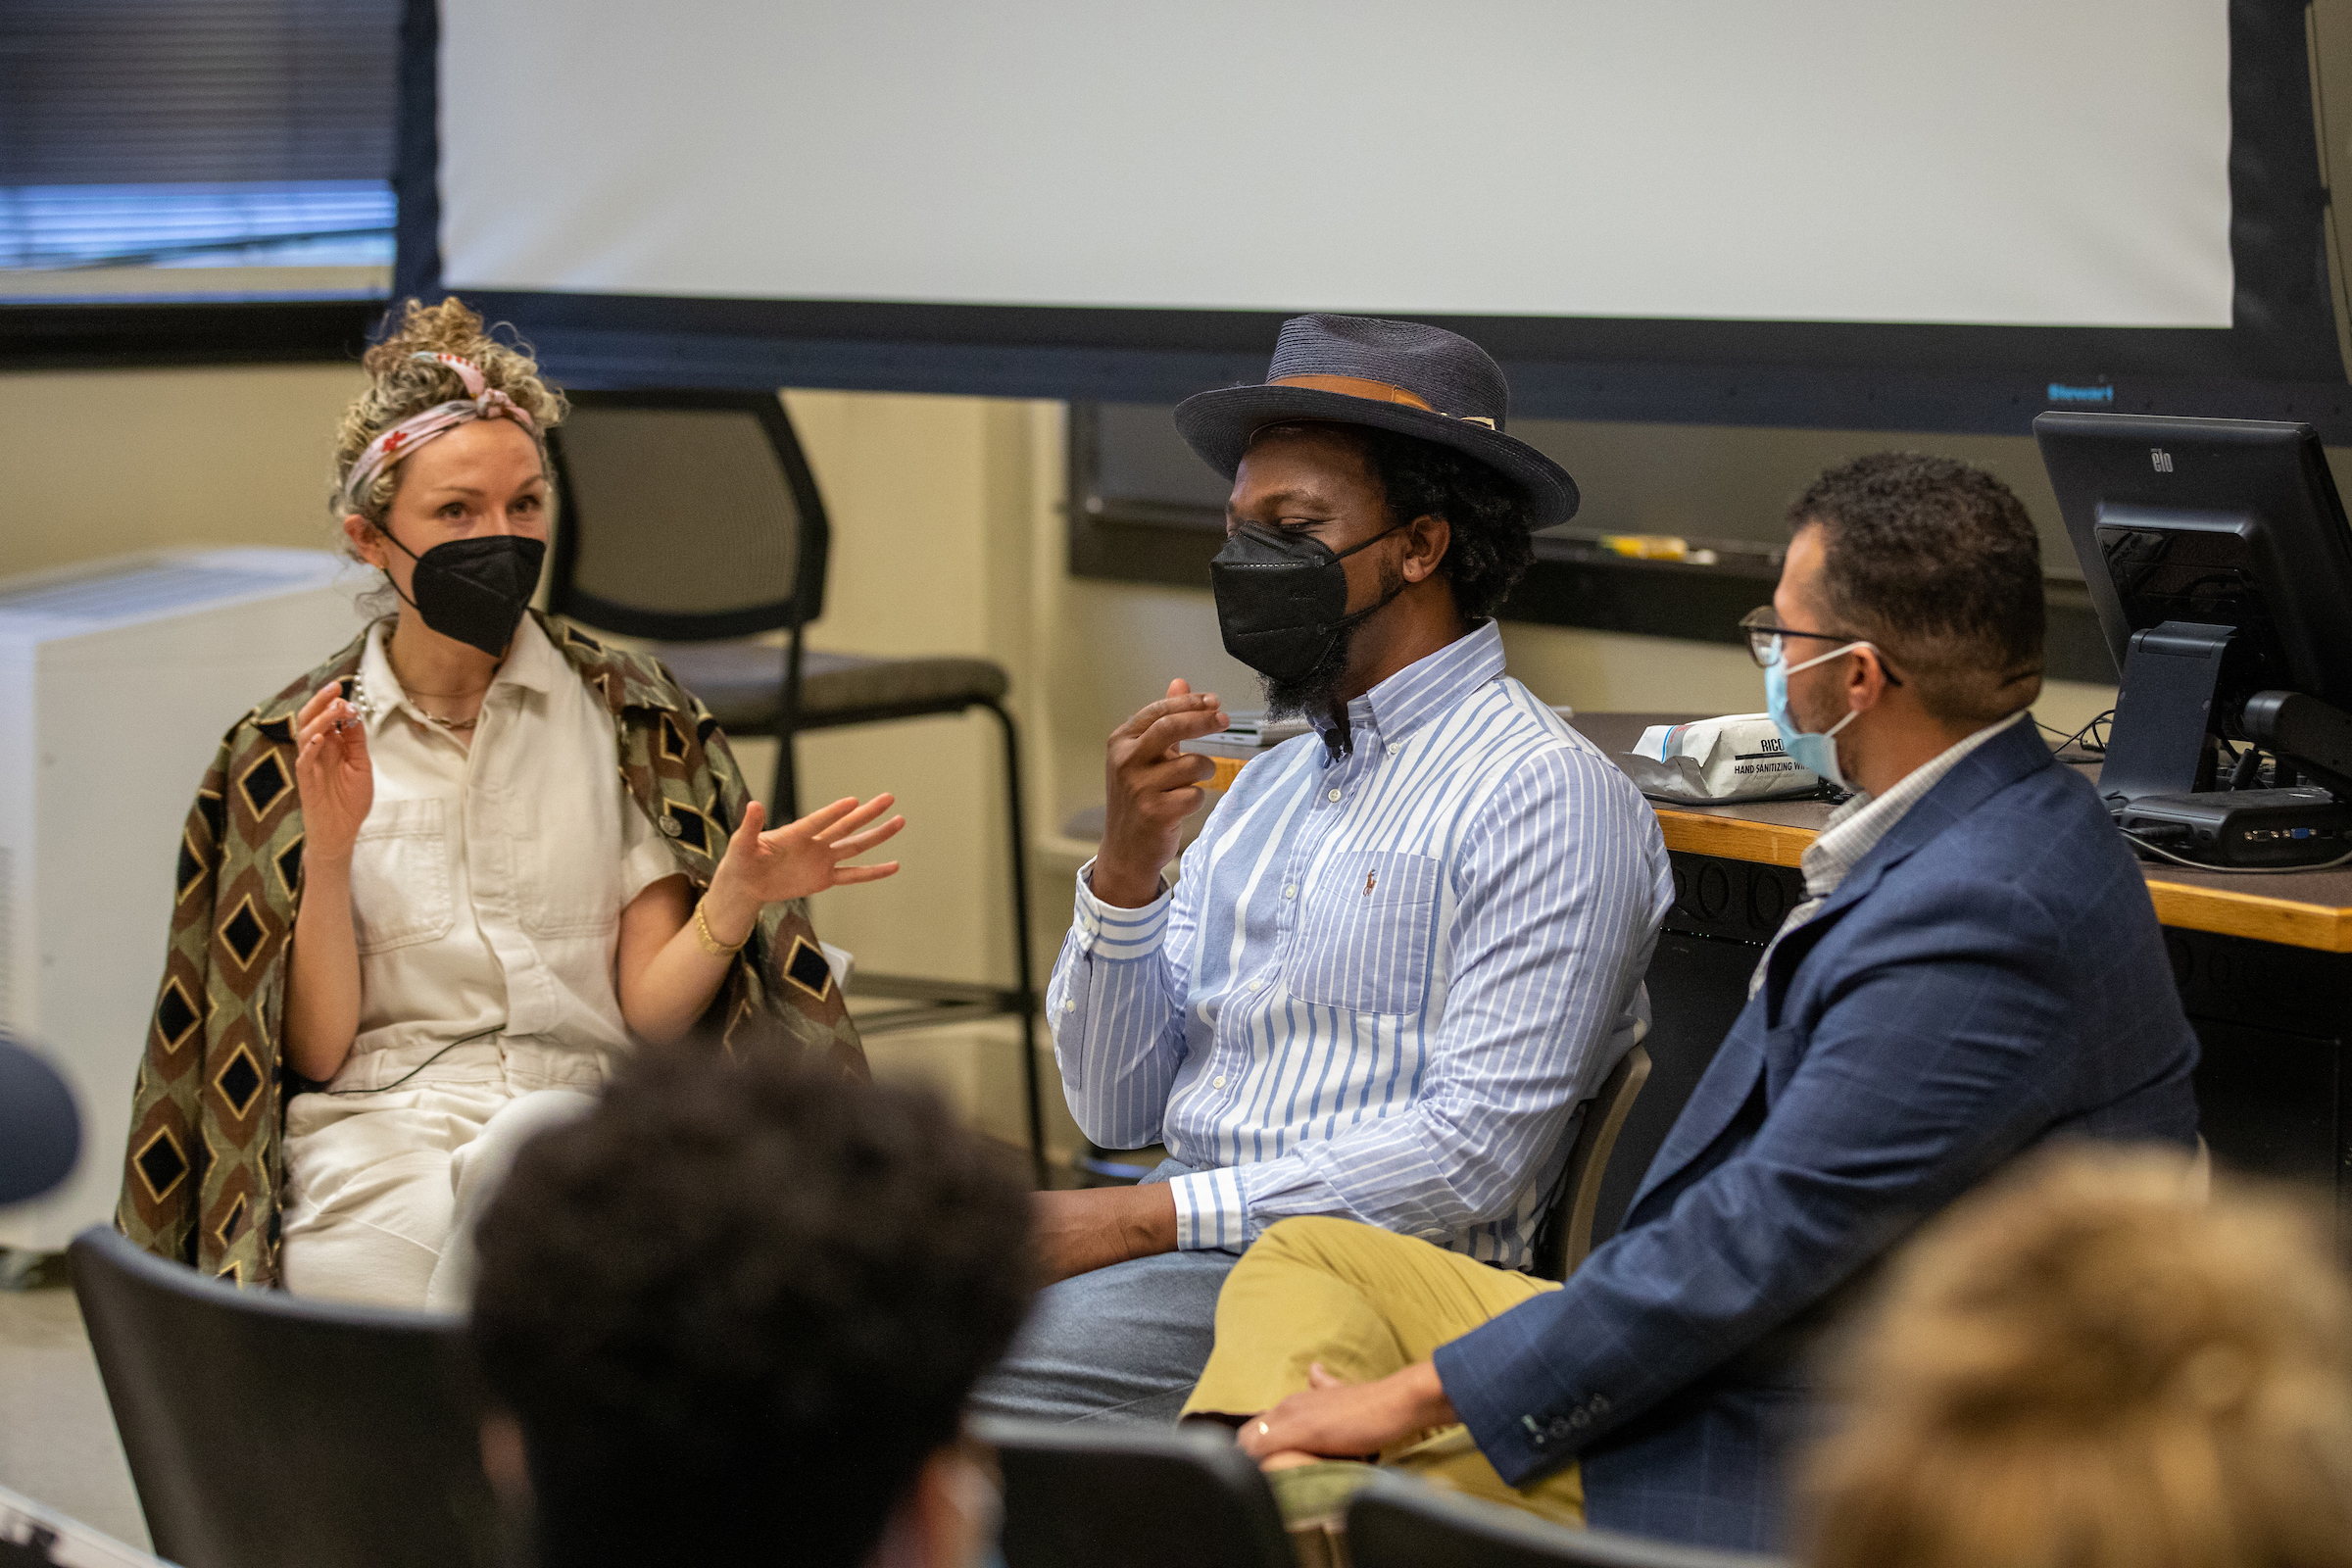 Shuford innovators sit around a classroom talking, with masks on.